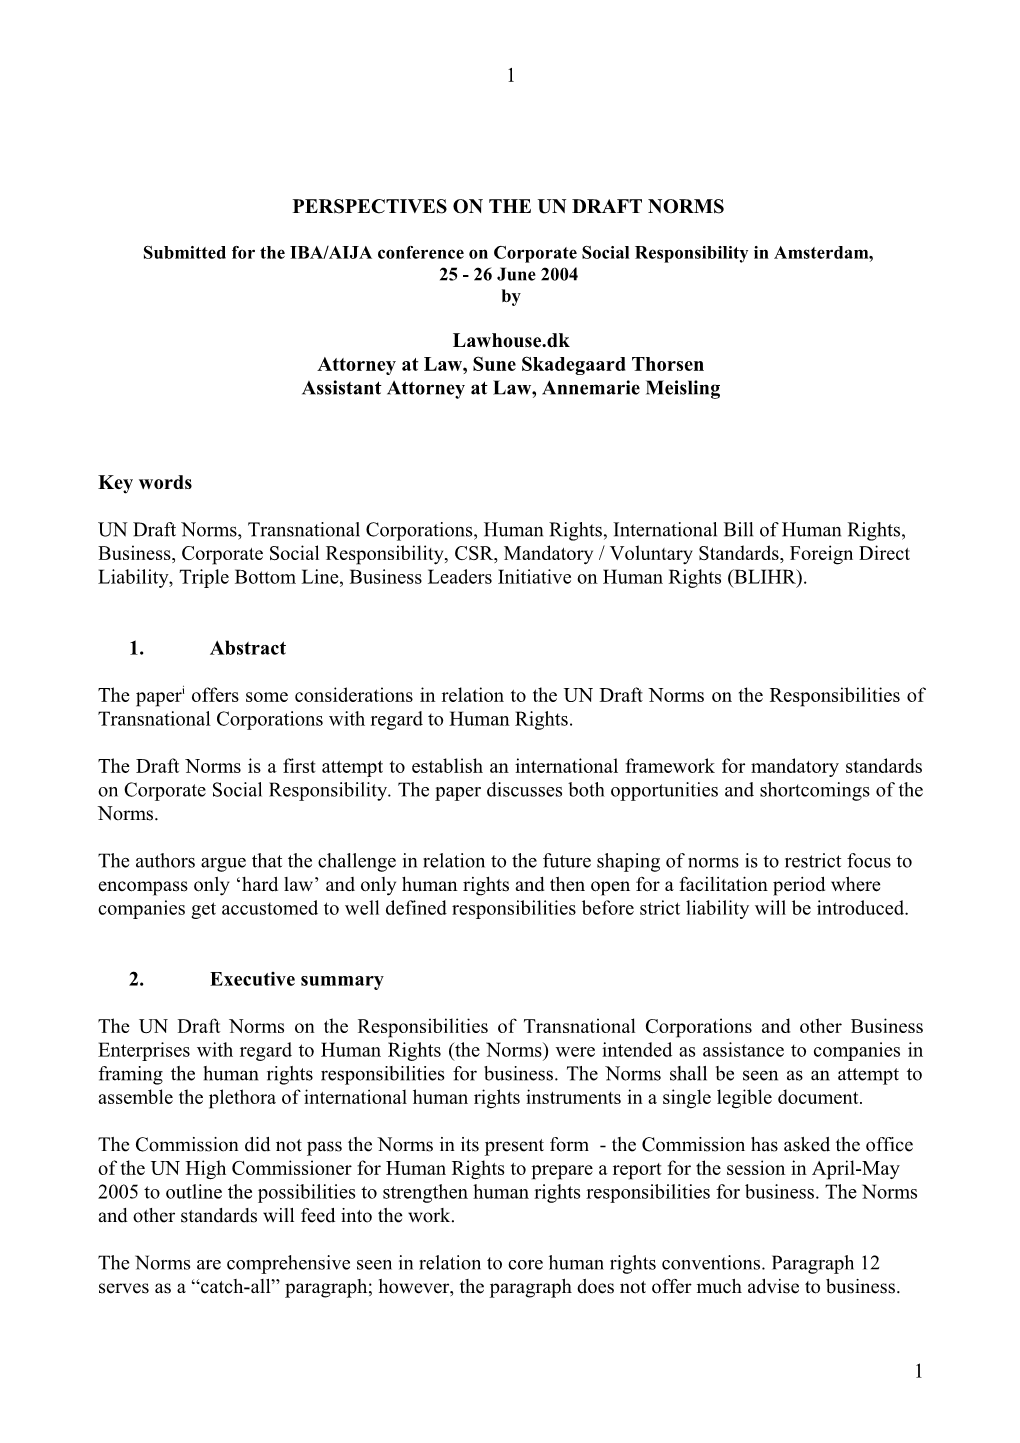 UN S Draft Norms on the Responsibilities of Transnational Corporations and Other Business